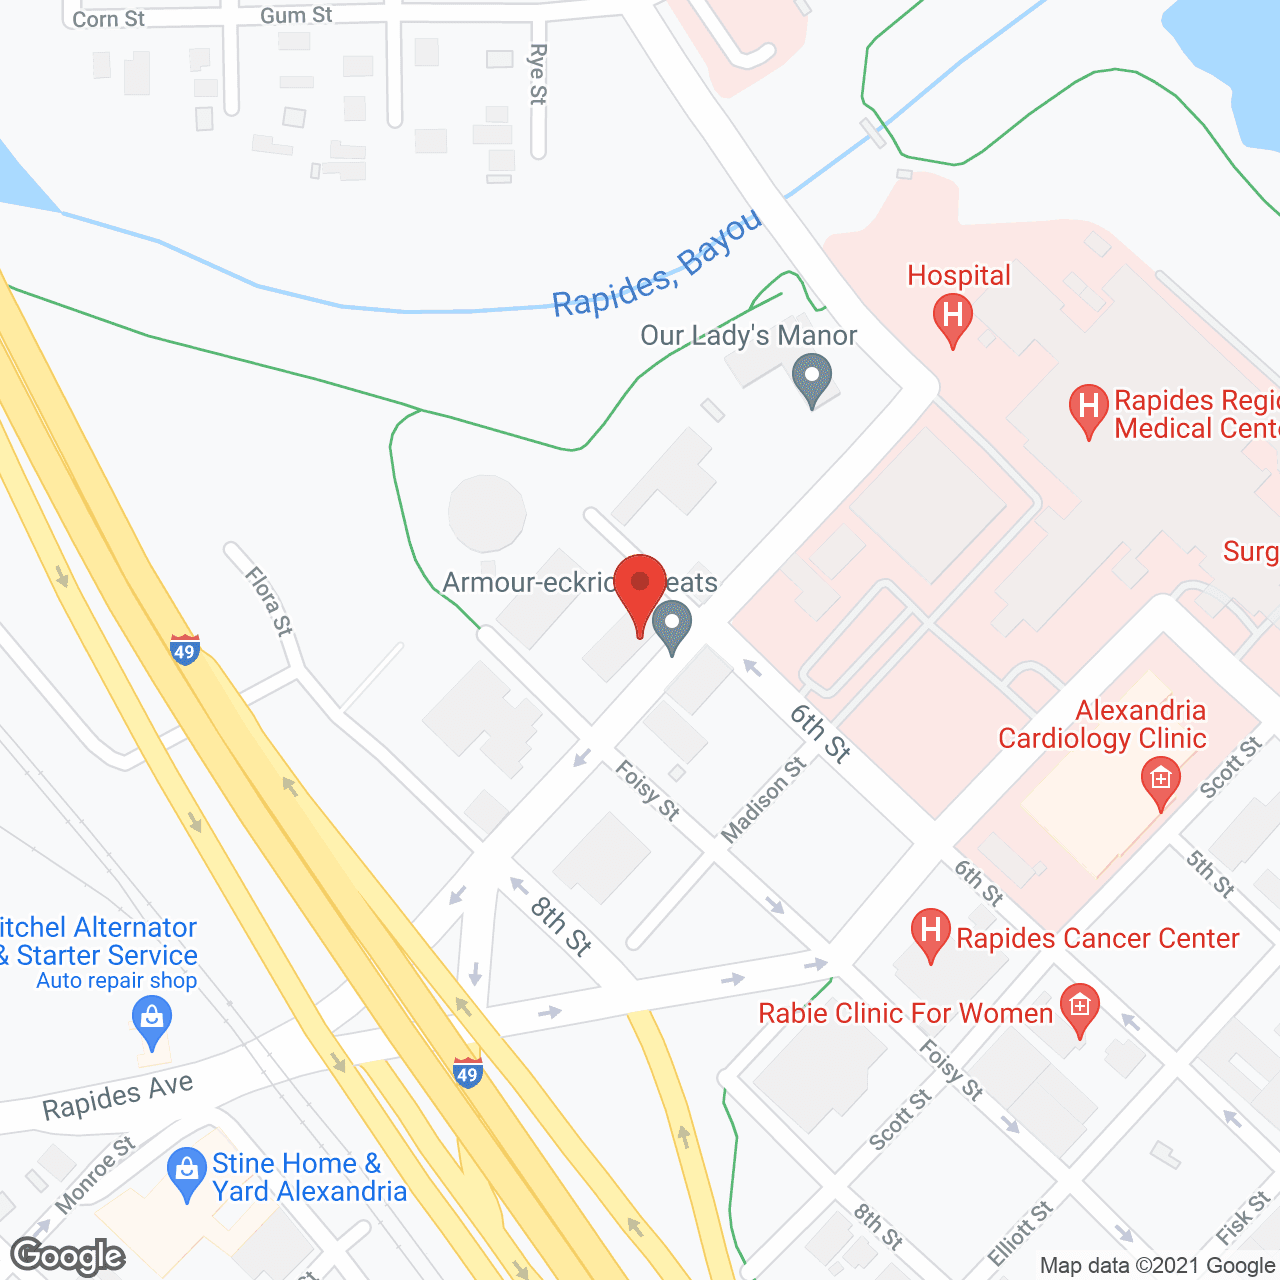 Friendship House Adult Day Care Services Inc. in google map